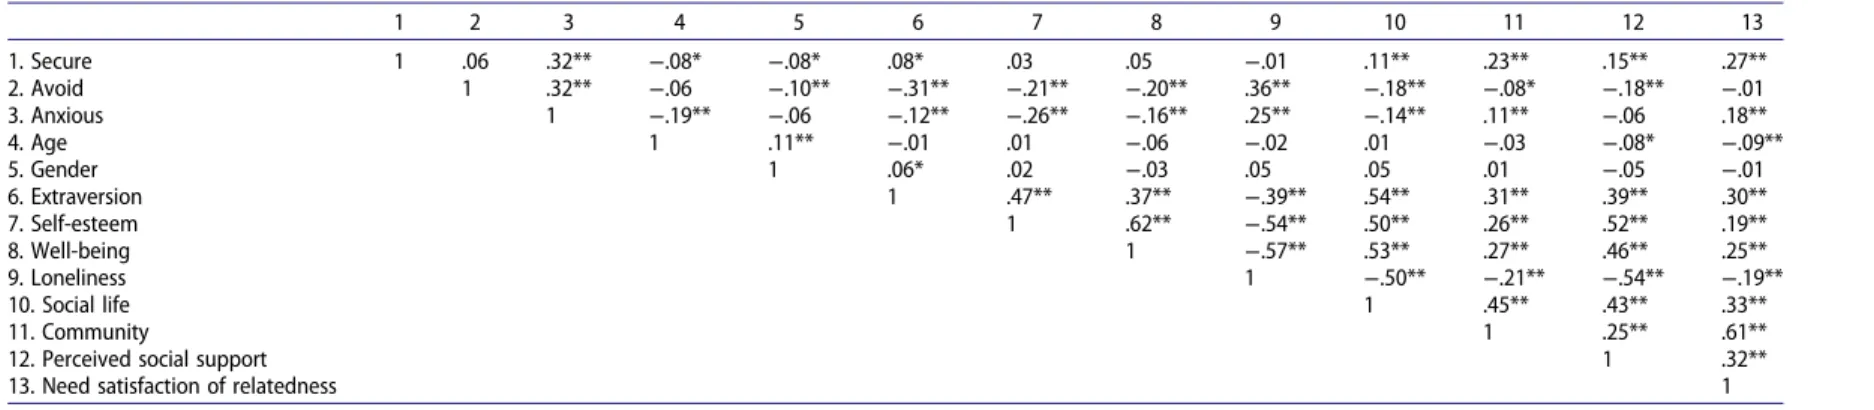 Table 2. Zero-ordered correlations between attachment style, control variables, and major outcome variables